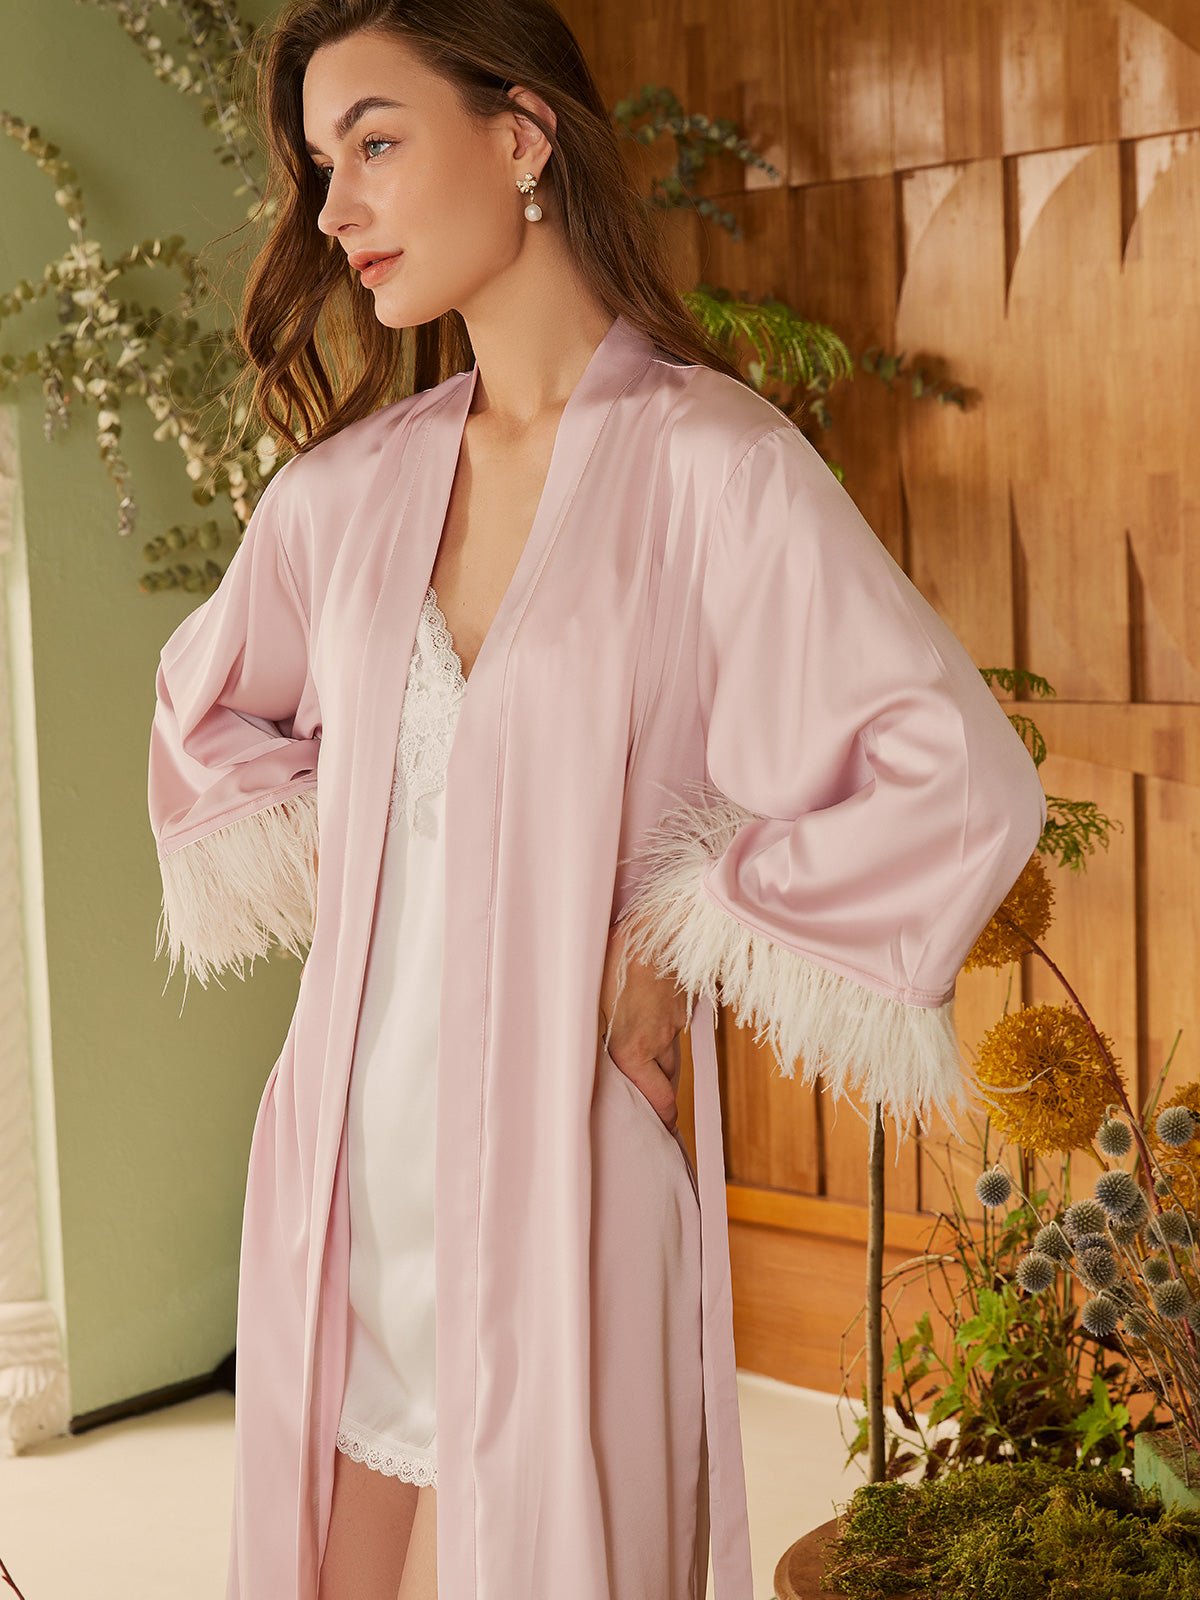 Feather Trim Pink Long Robe Dressing Gown for Bride - Ulivary